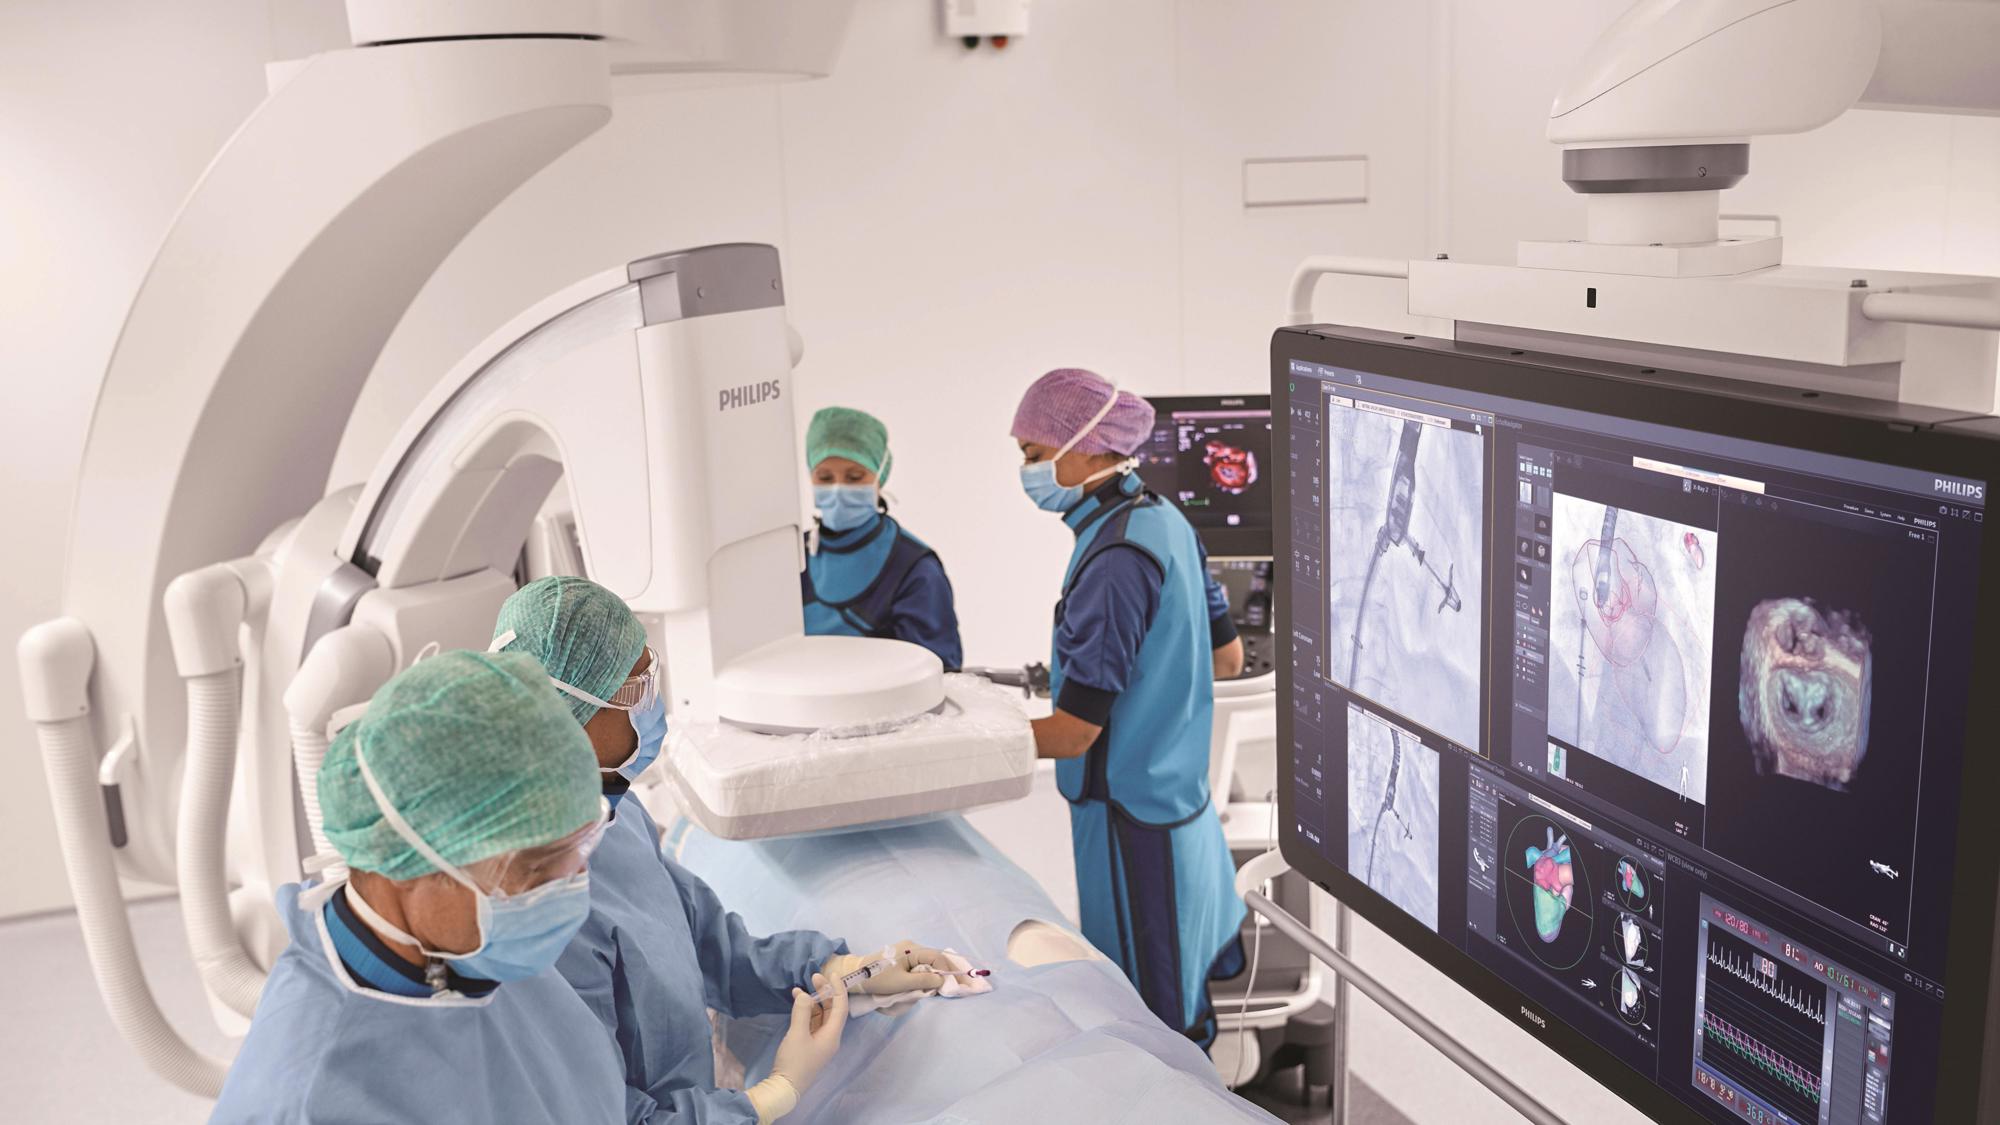 Nurses perform a scan with Philips Eindhoven's equipment